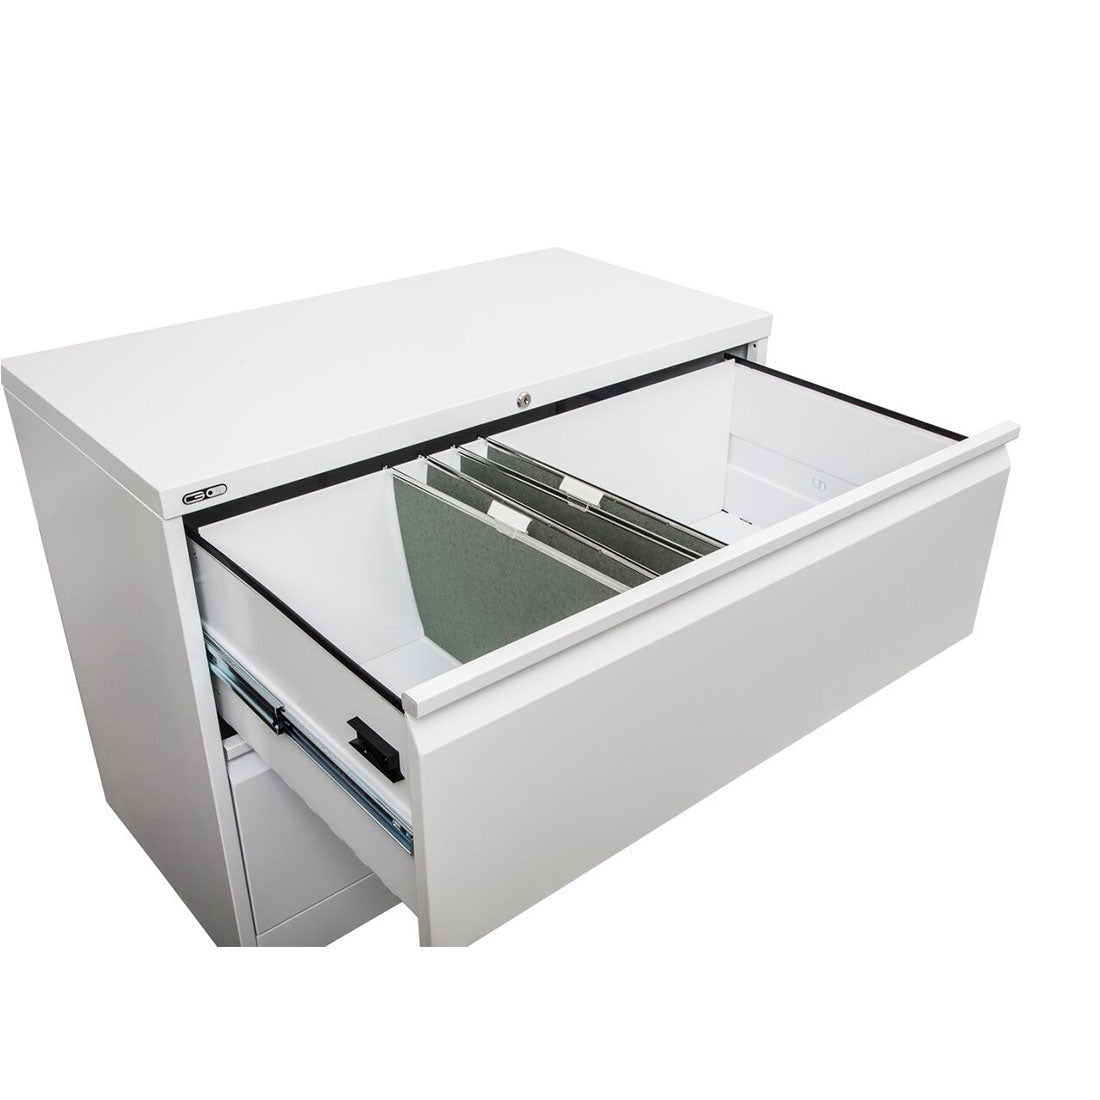 GO Lateral Filing Cabinet 3 Drawer - switchoffice.com.au